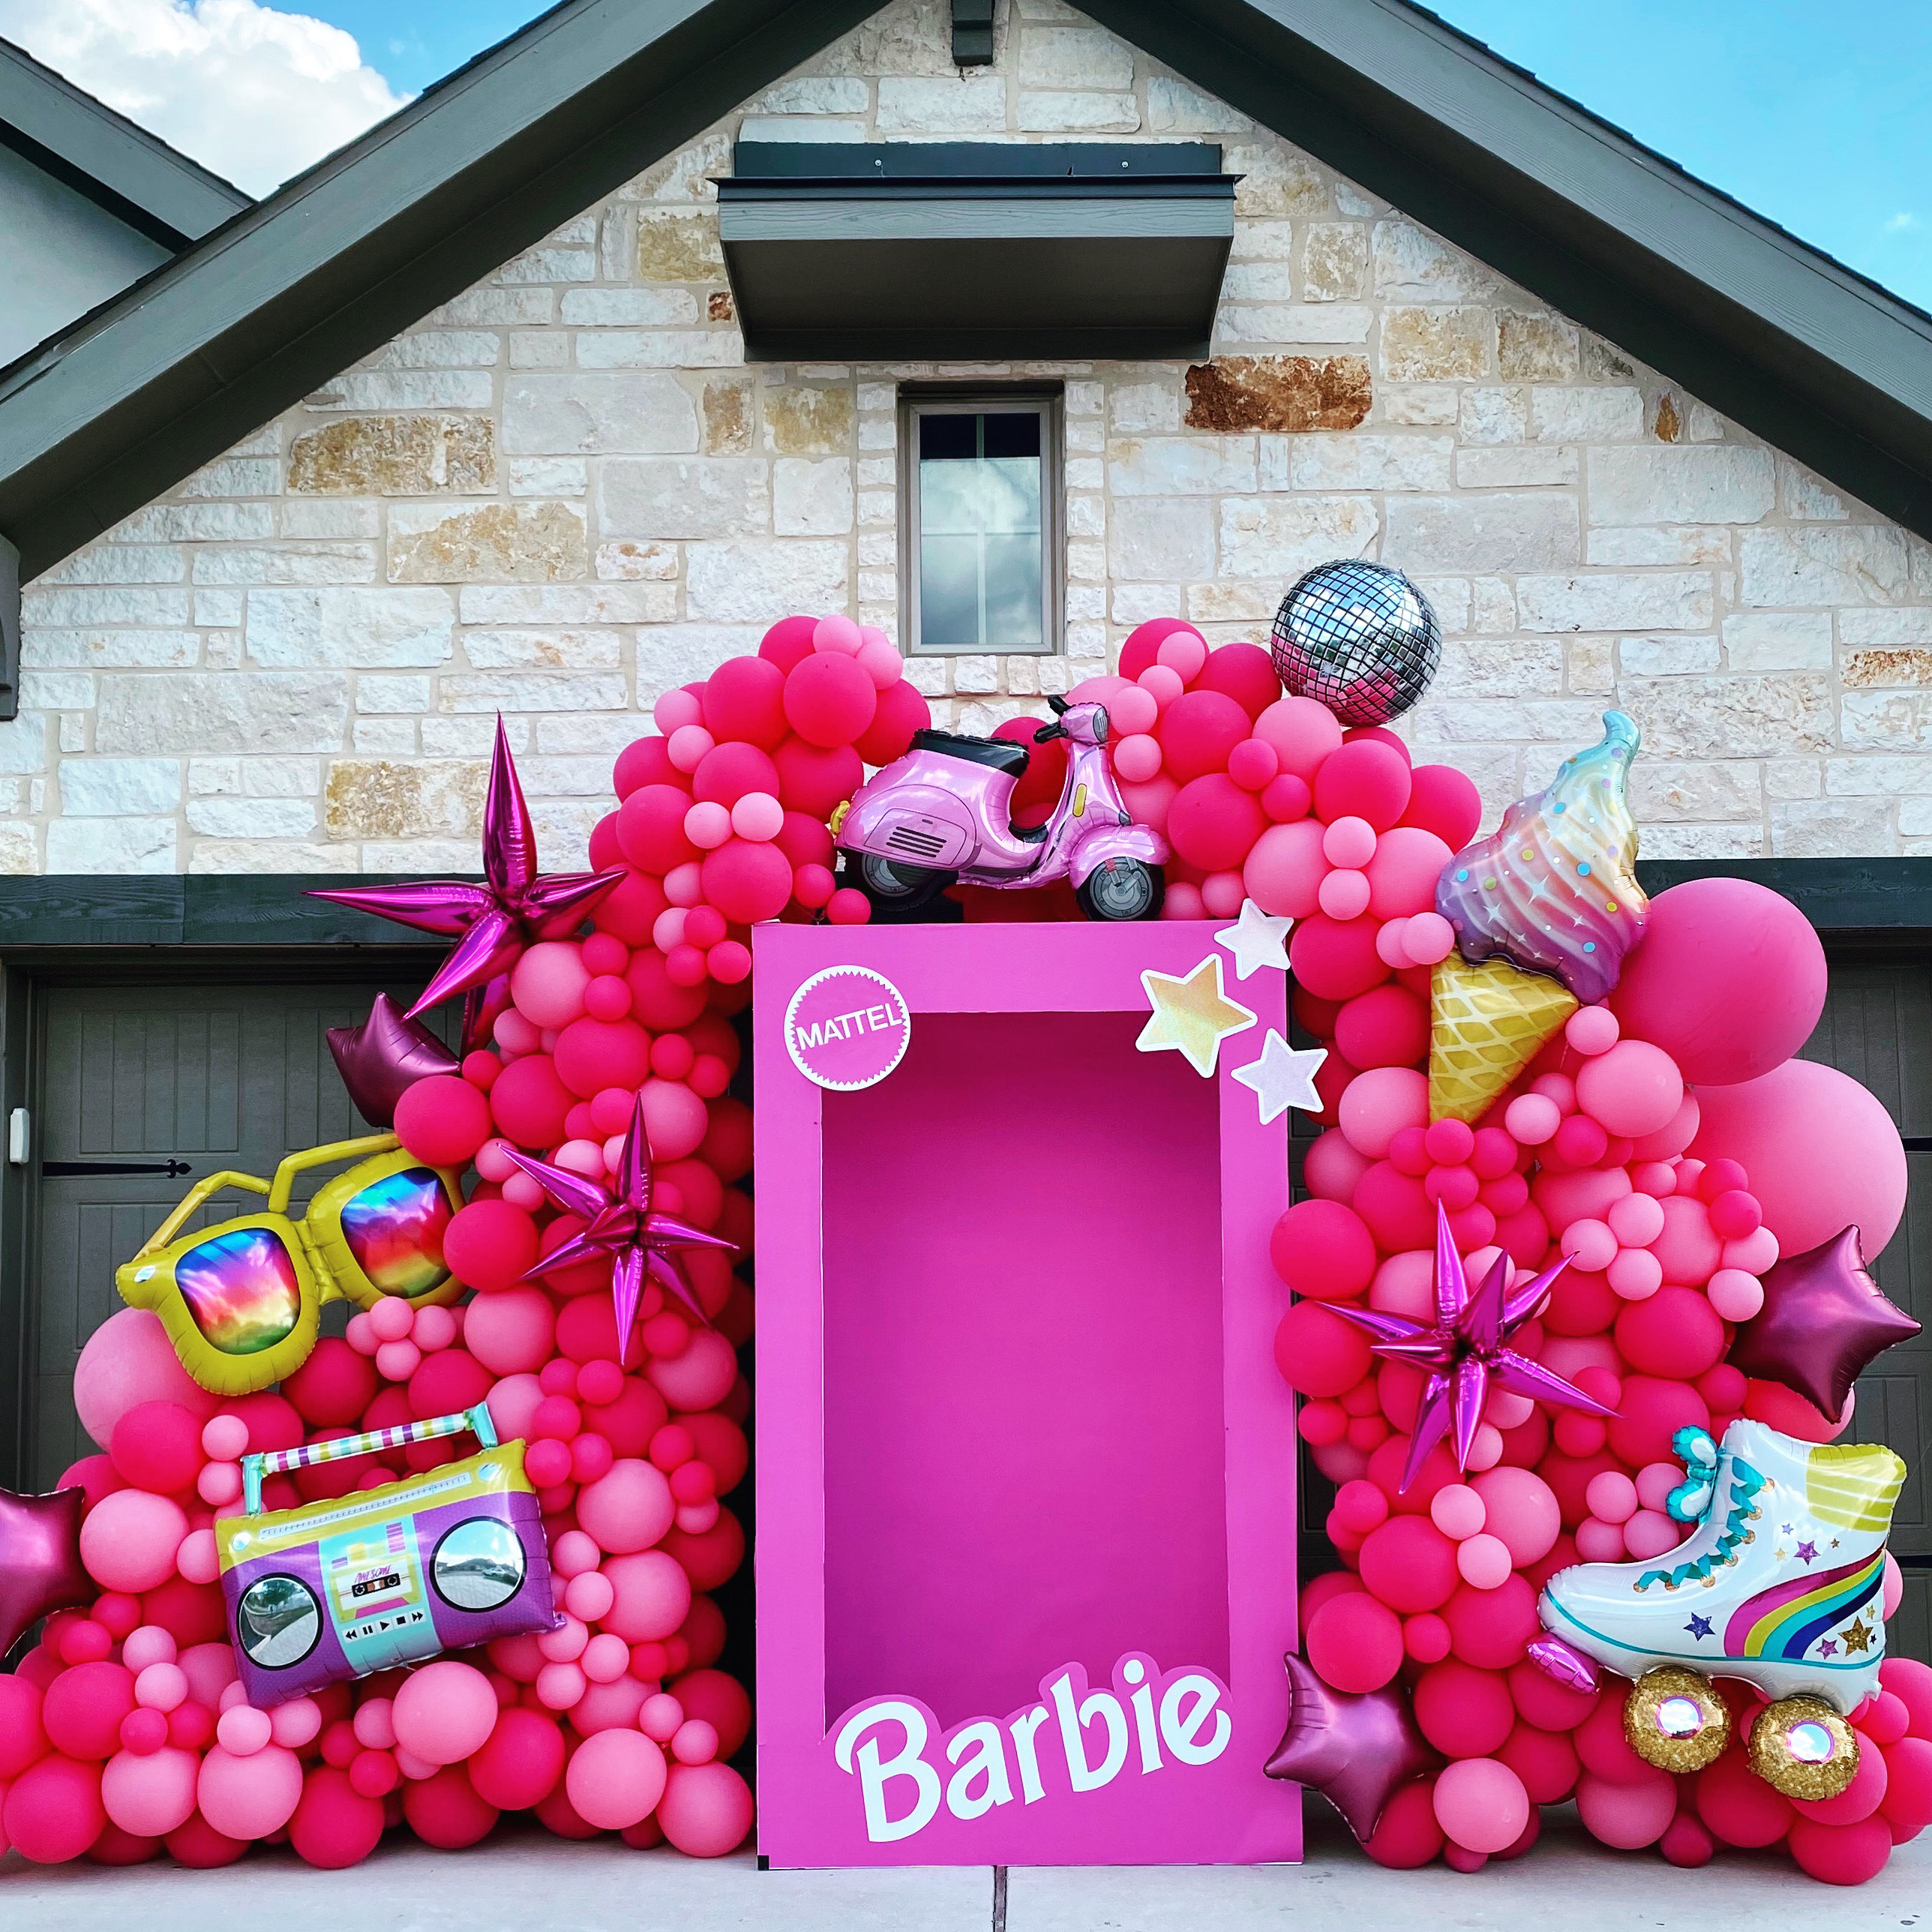 Barbie party backdrop by Moonbird Events